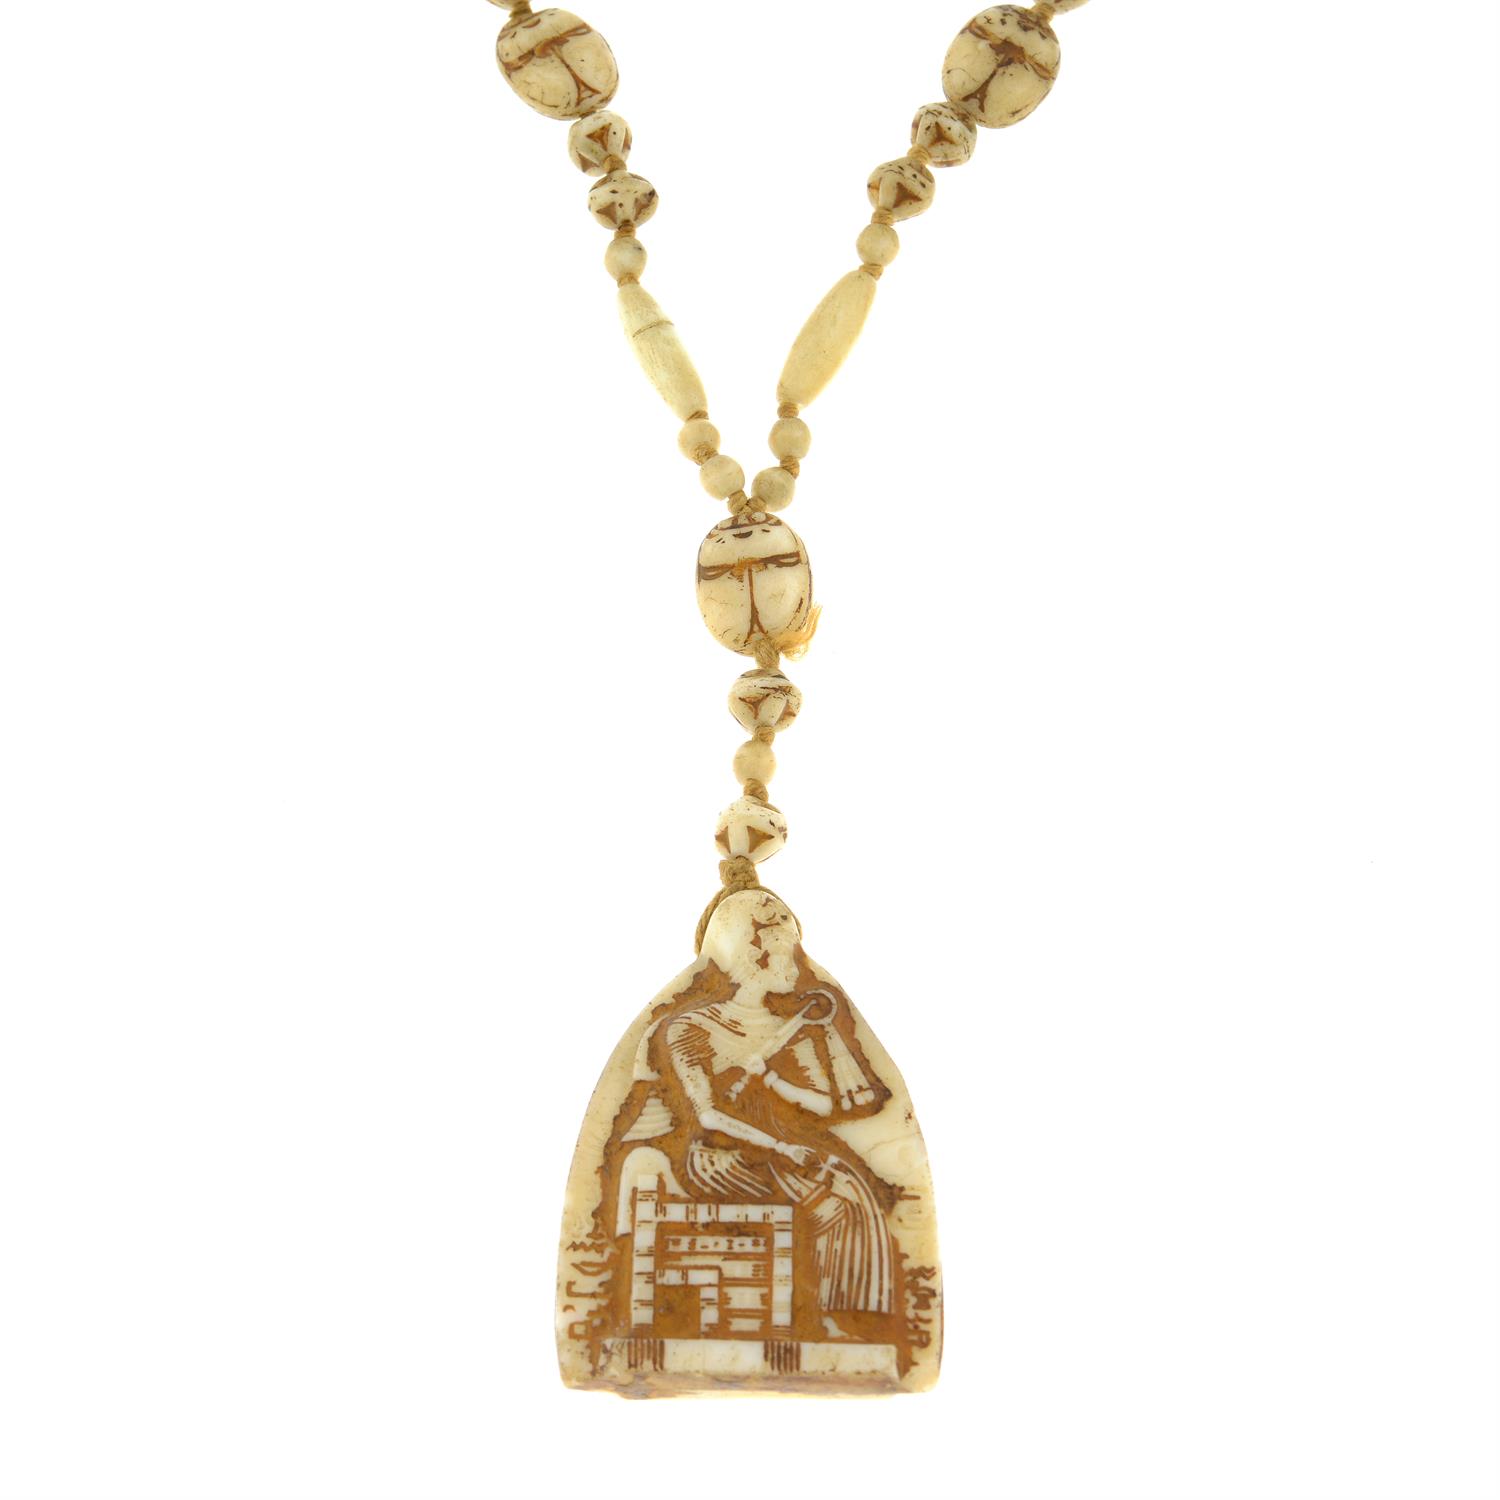 A carved bone bead necklace, with Egyptian iconography.